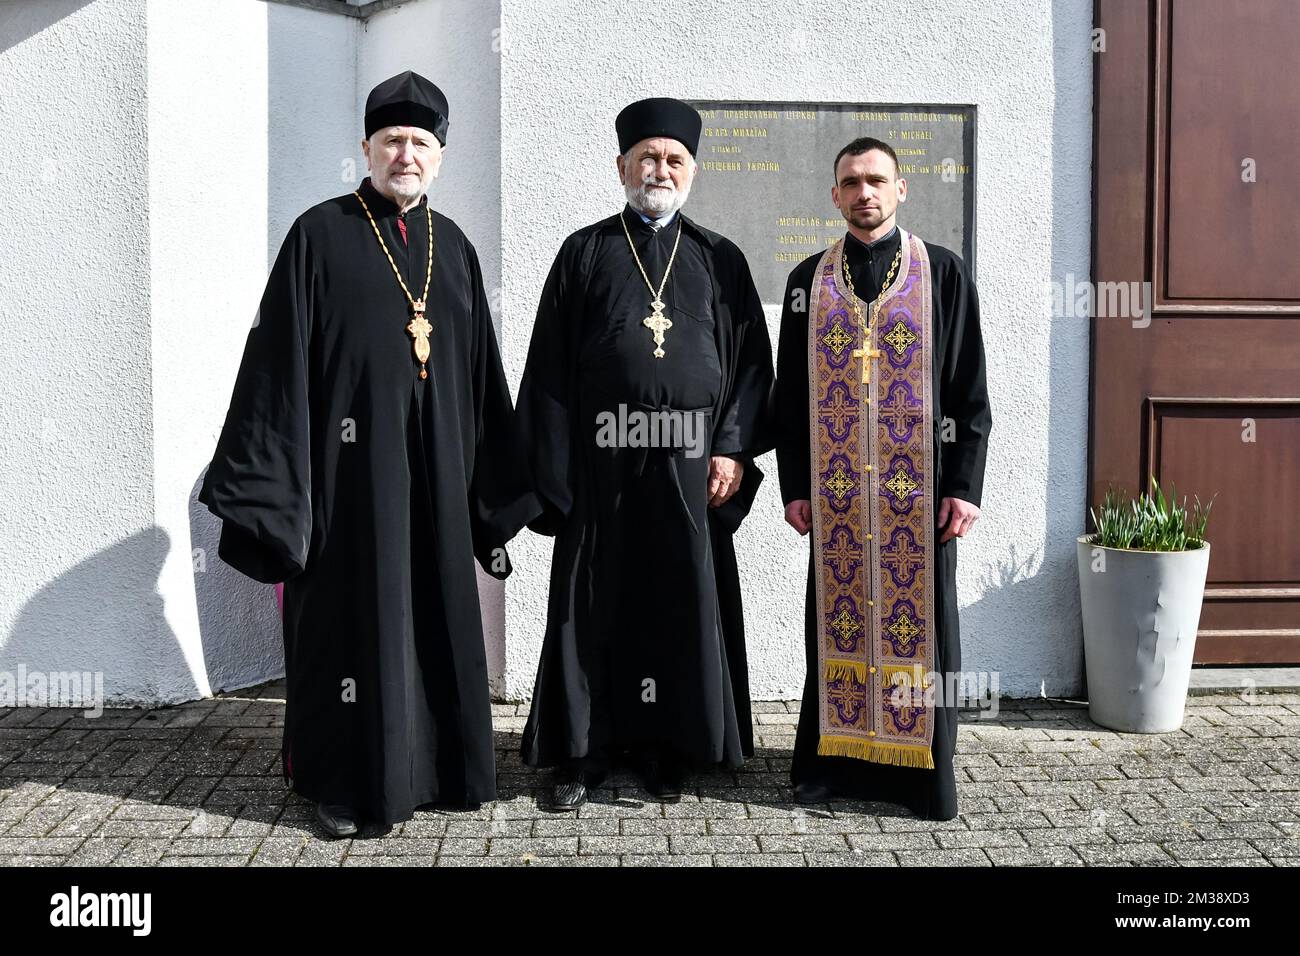 Archbishop Athenagoras Peckstadt of the Orthodox church in Belgium, and two  unidentified priests pictured during a visit of Flemish minister Somers to  the Ukrainian community in Genk, Friday 04 March 2022. Following